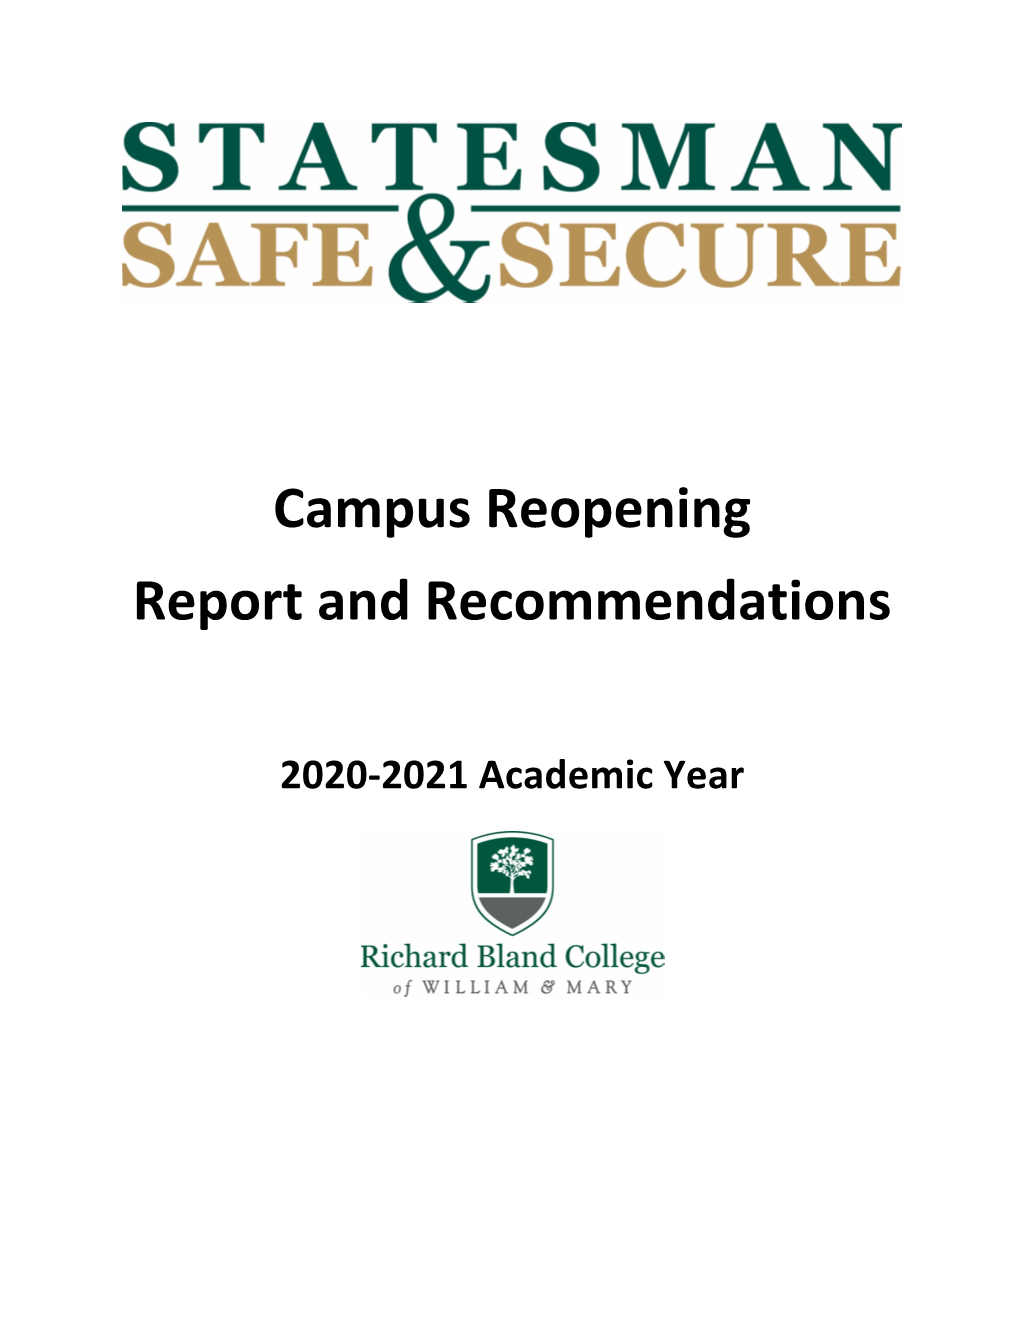 Campus Reopening Report and Recommendations